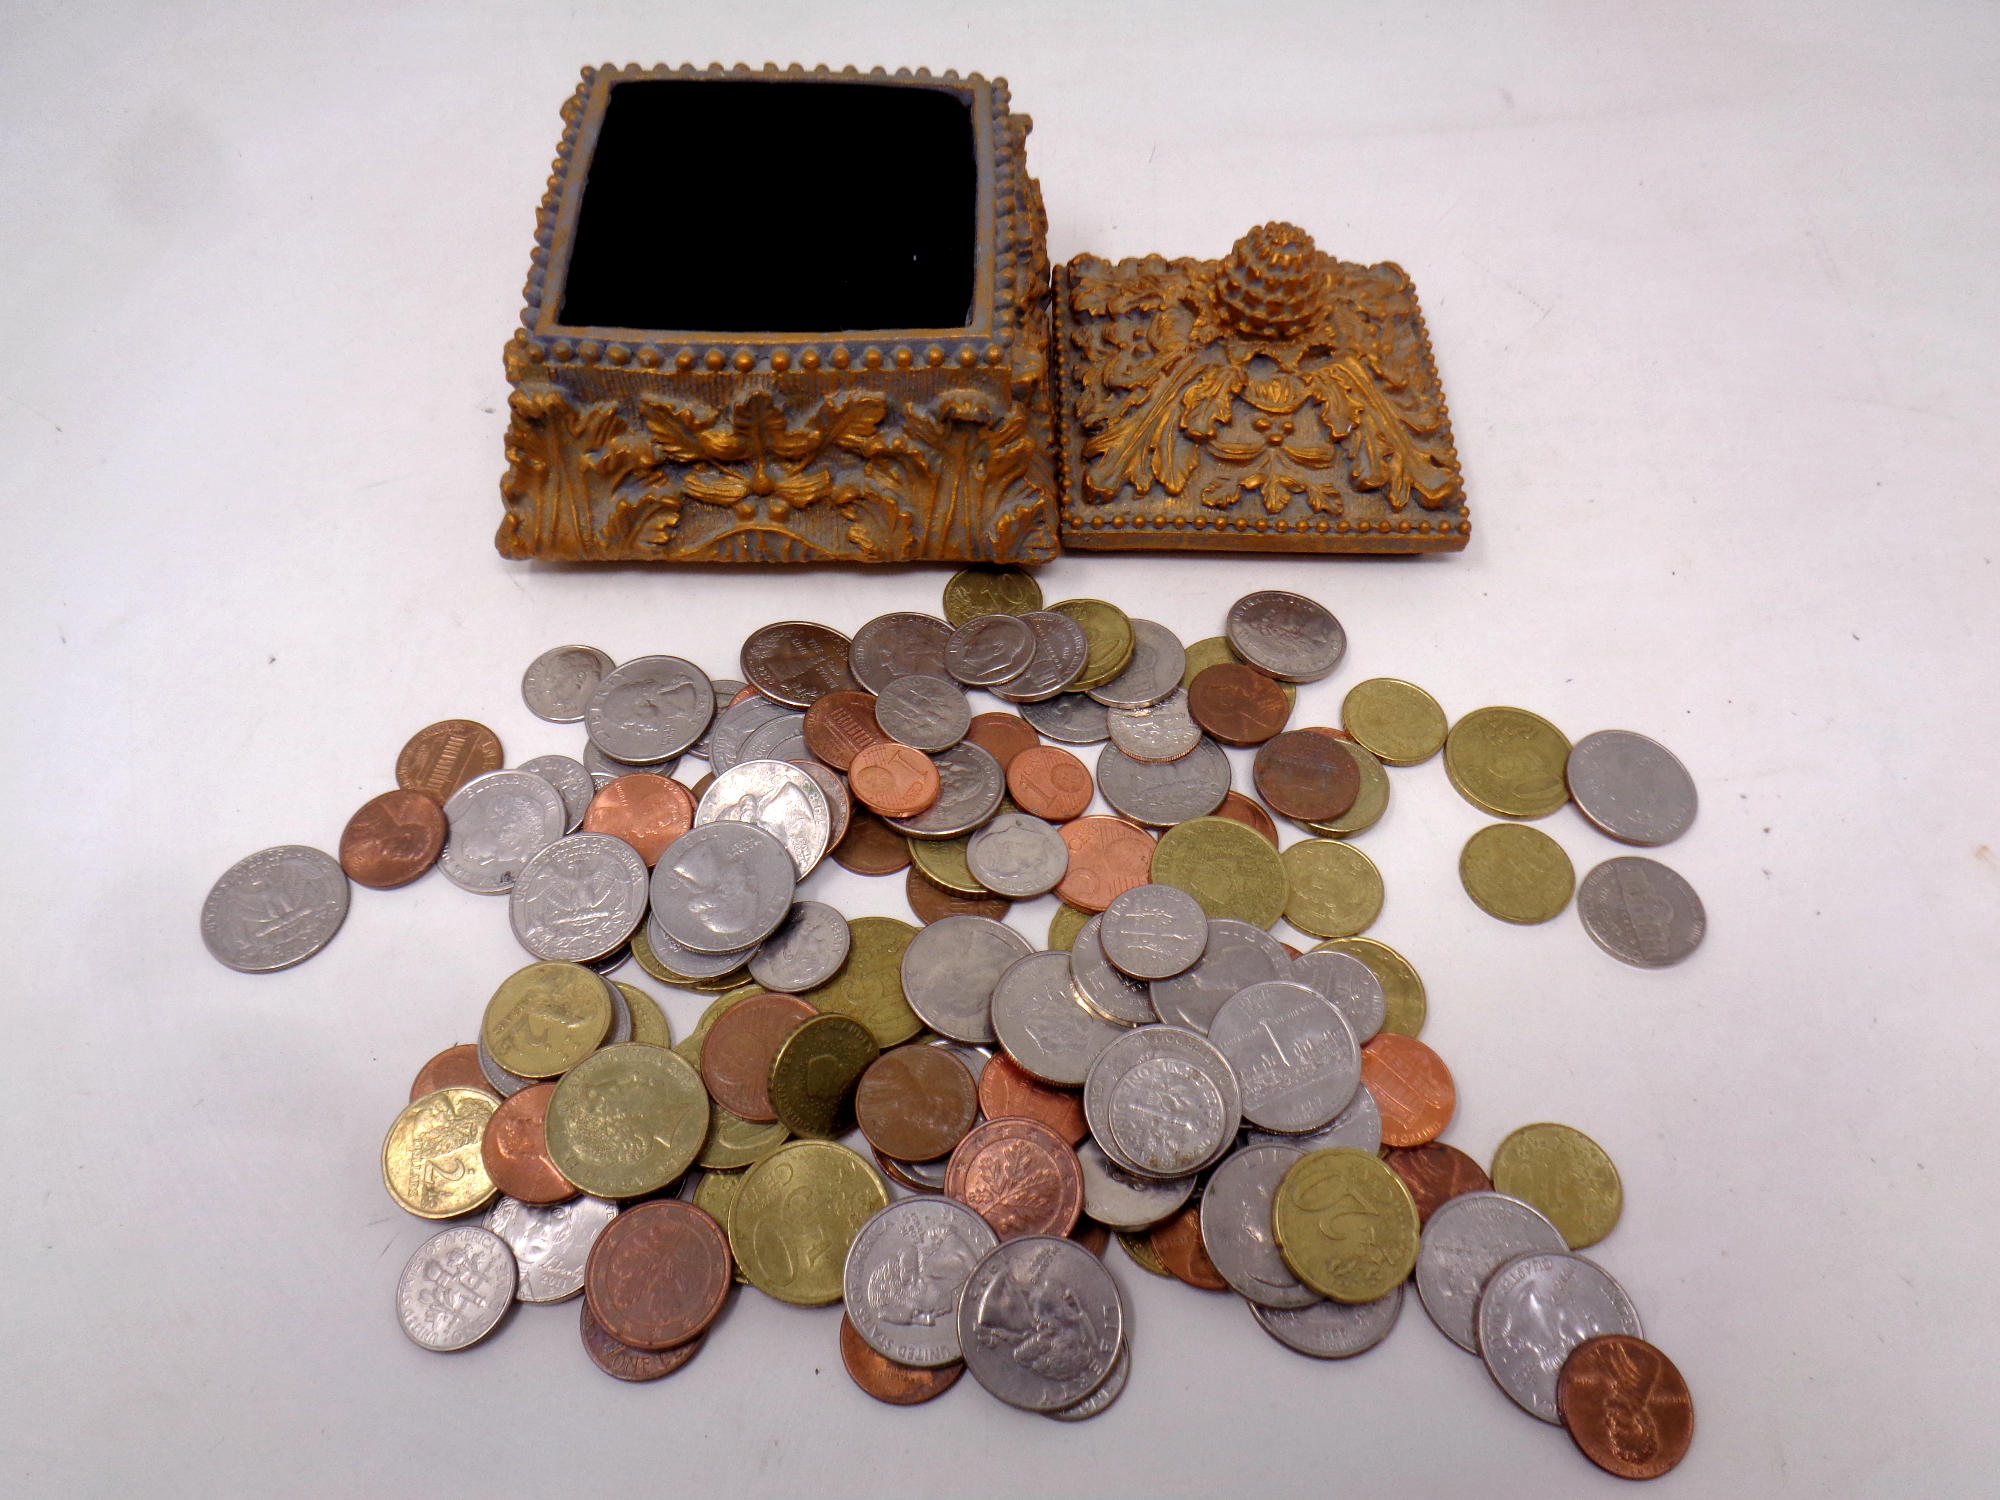 A decorative gilt lidded trinket box containing US and European coins